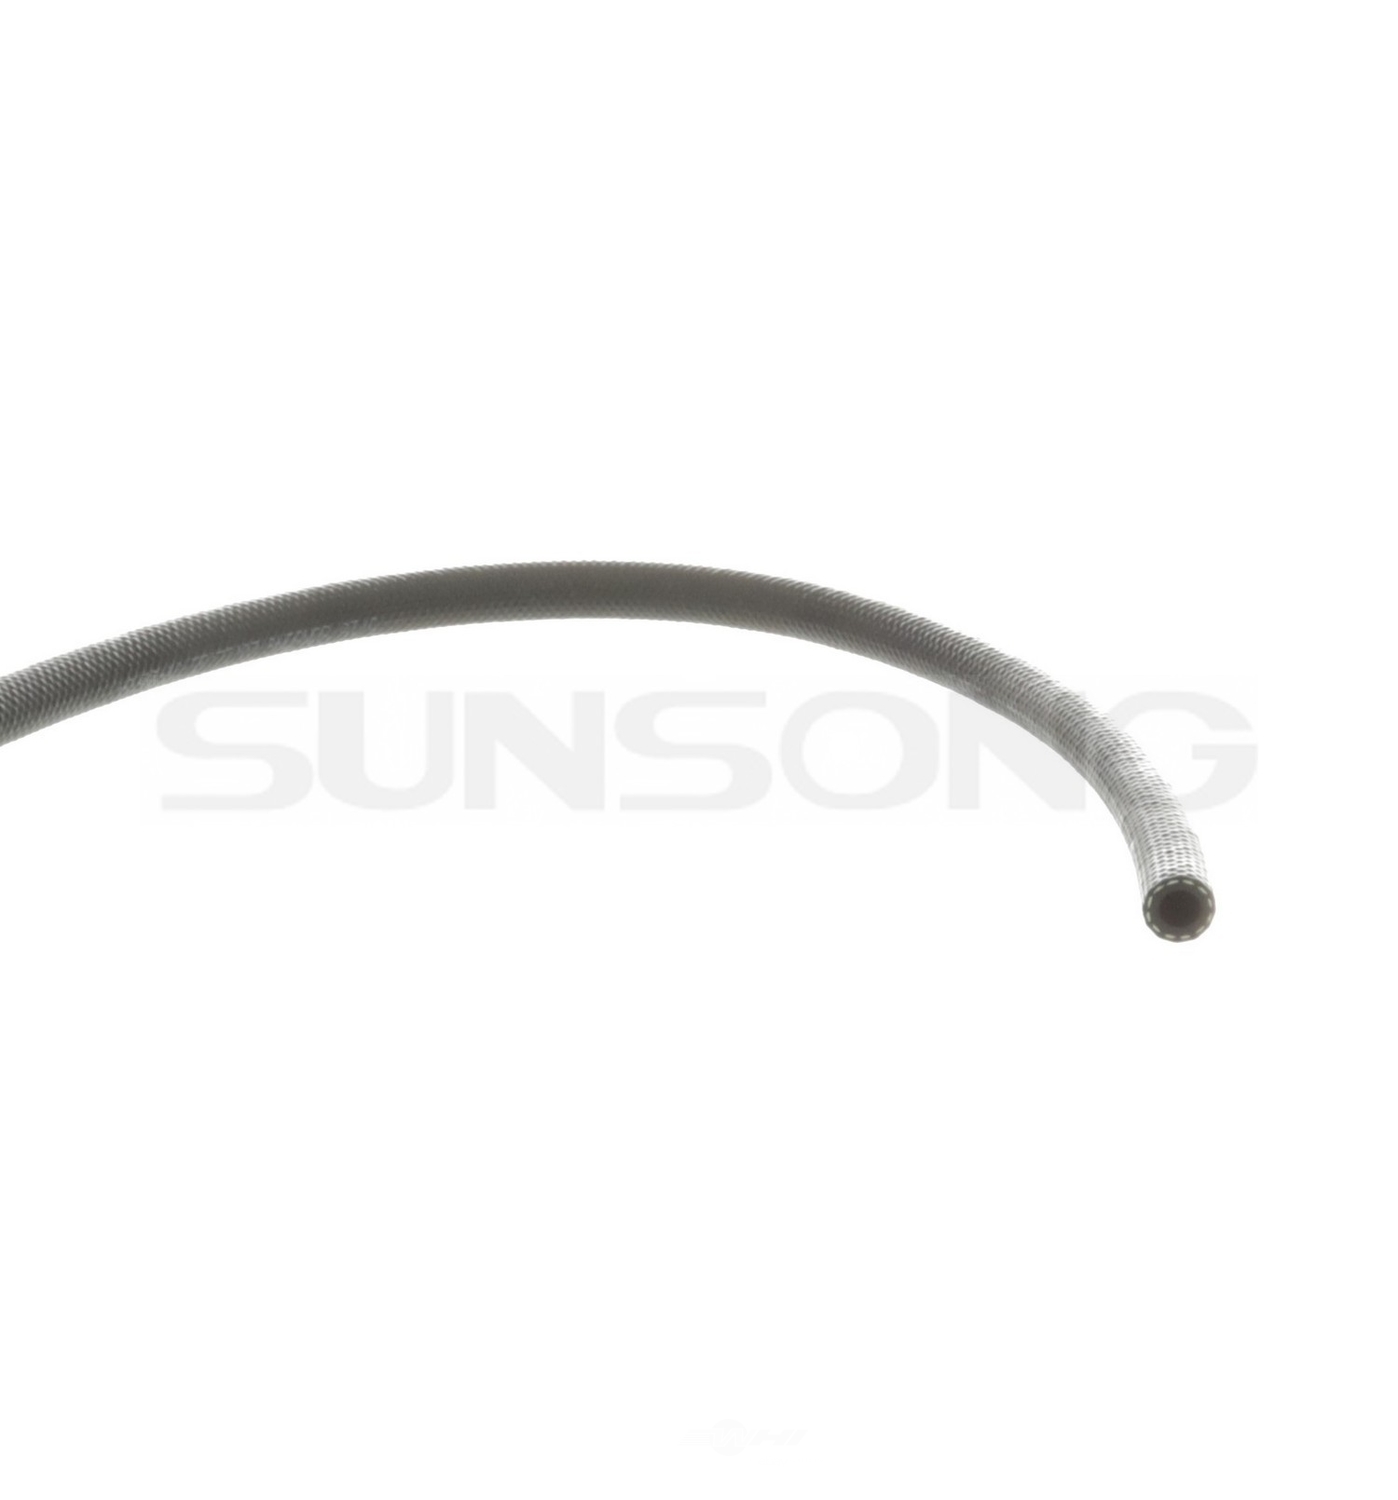 SUNSONG NORTH AMERICA - Auto Trans Oil Cooler Hose Assembly - SUG 5801417